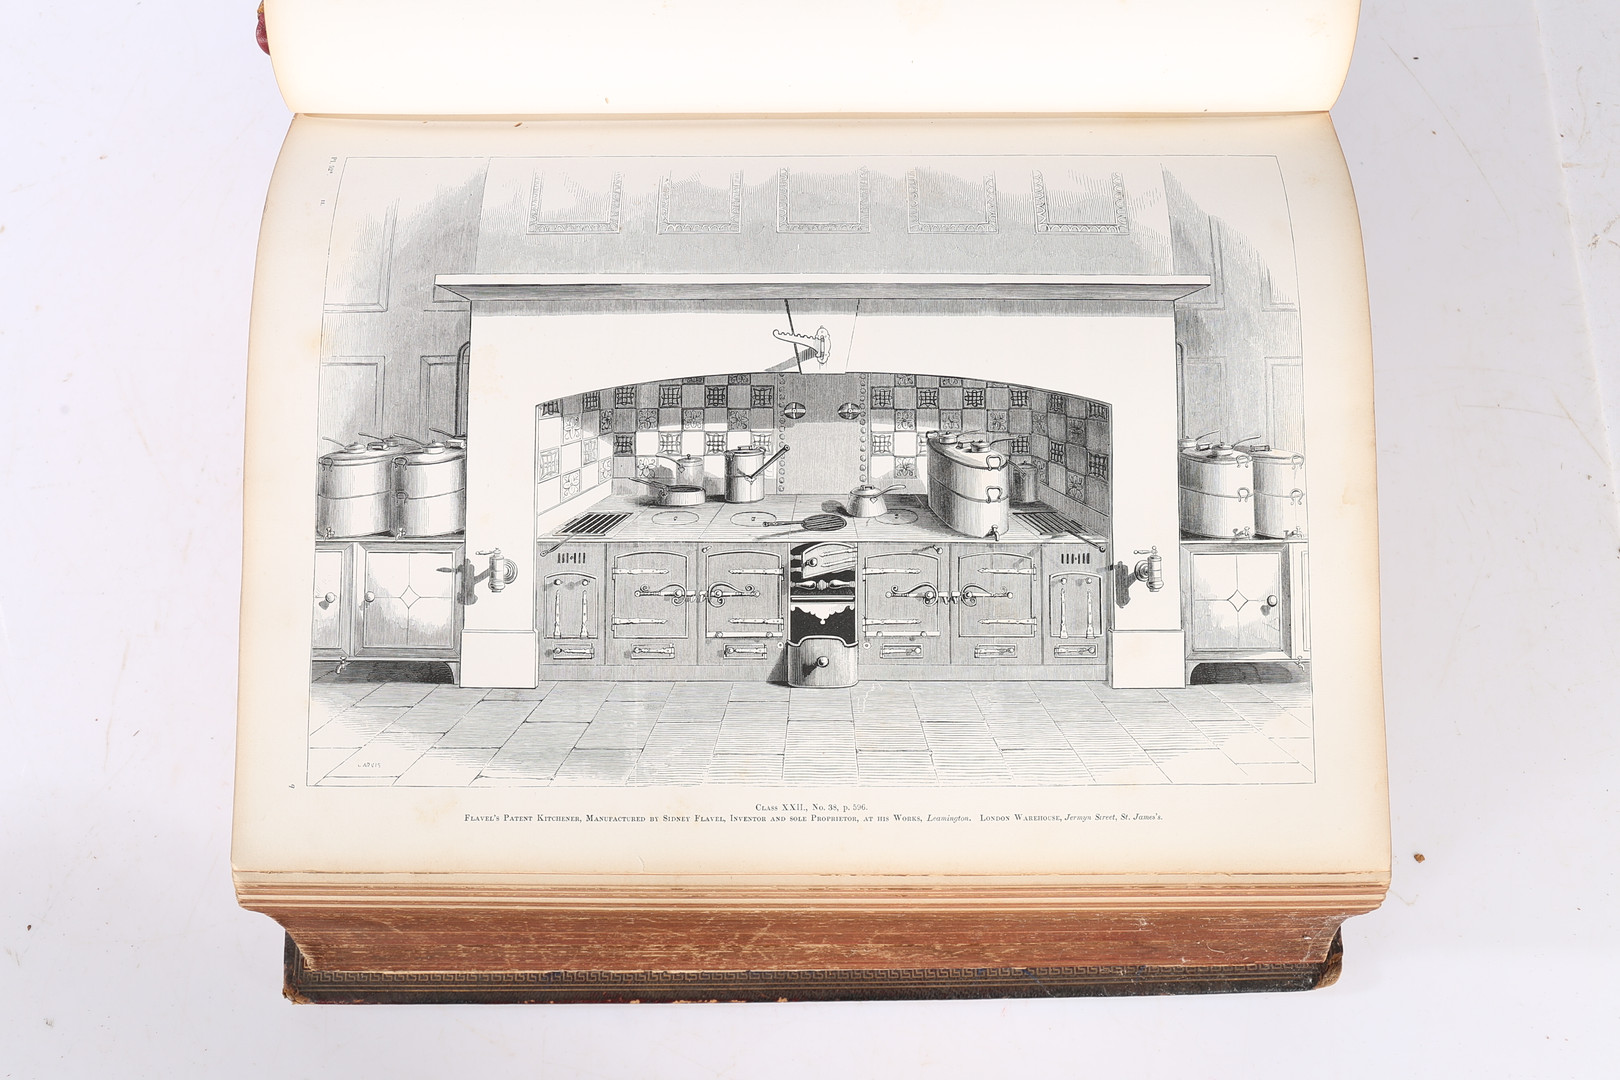 GREAT EXHIBITION INTEREST - "GREAT EXHIBITION OF THE WORKS OF INDUSTRY OF ALL NATIONS 1851", "PRESEN - Image 14 of 23